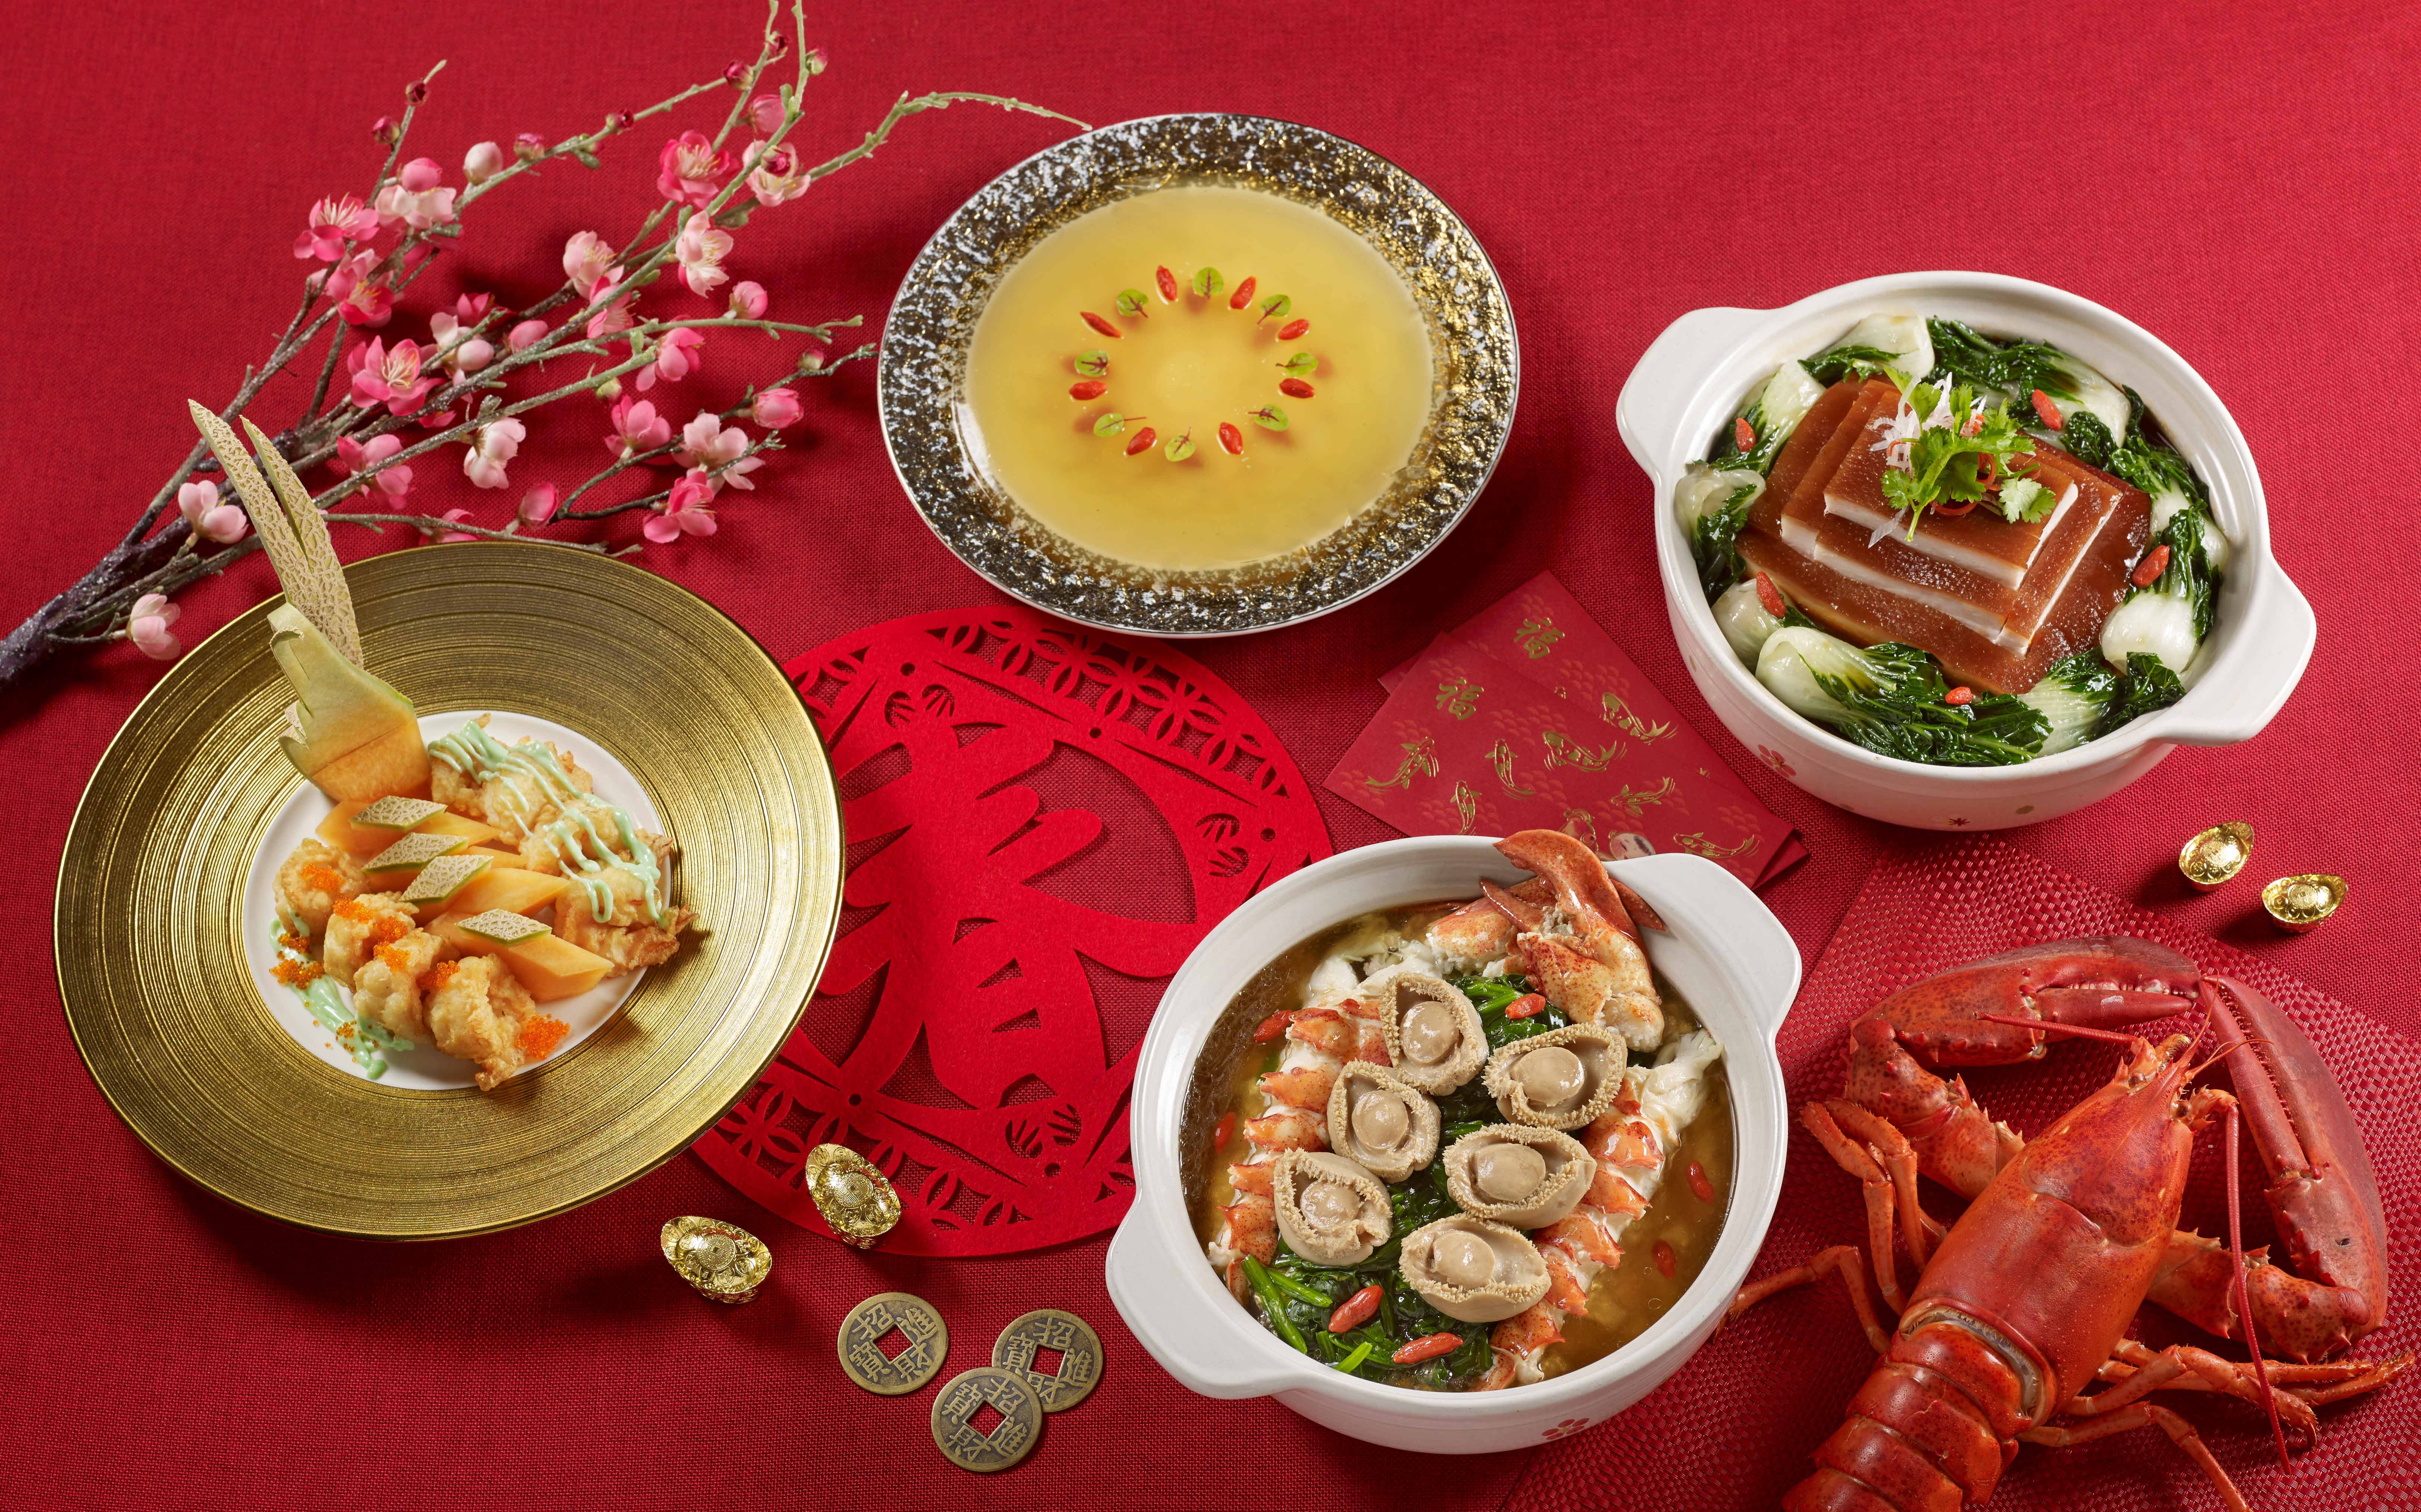 REJOICE IN THE LUNAR NEW YEAR WITH A TREASURE TROVE OF FESTIVE SPECIALTIES FOR A BOUNTIFUL CELEBRATION